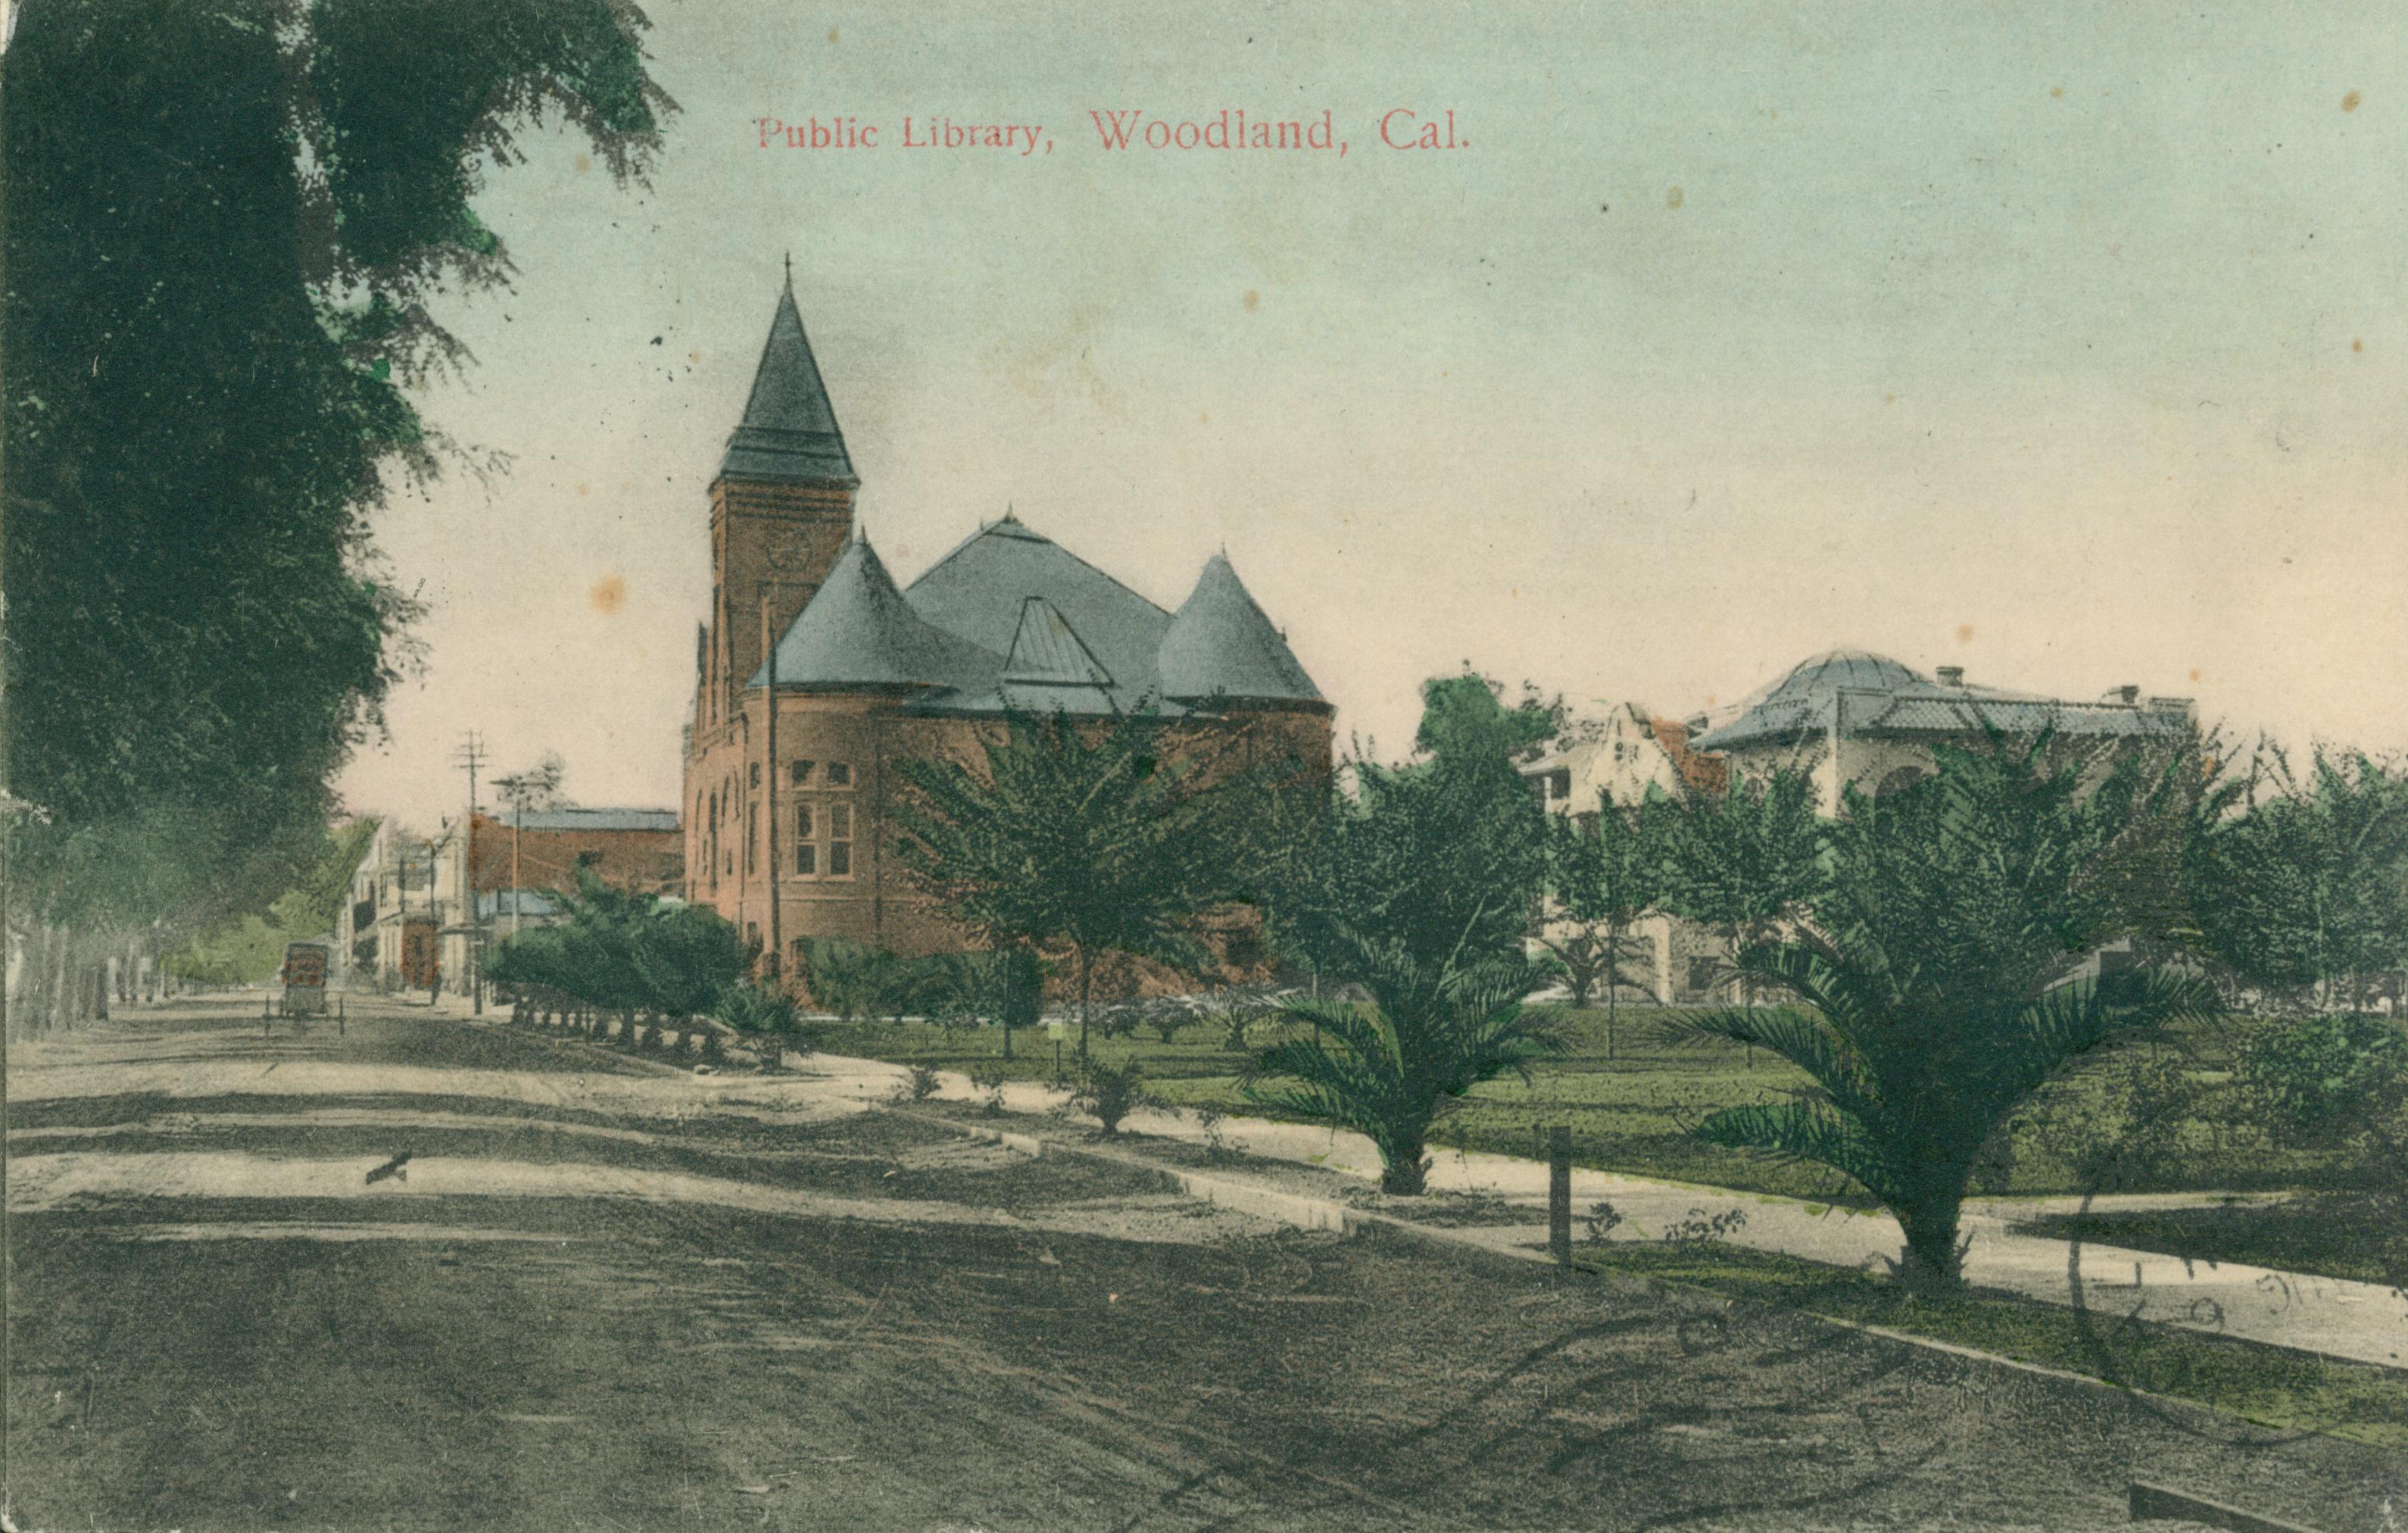 Shows the public library in Woodland facing a palm-lined street.